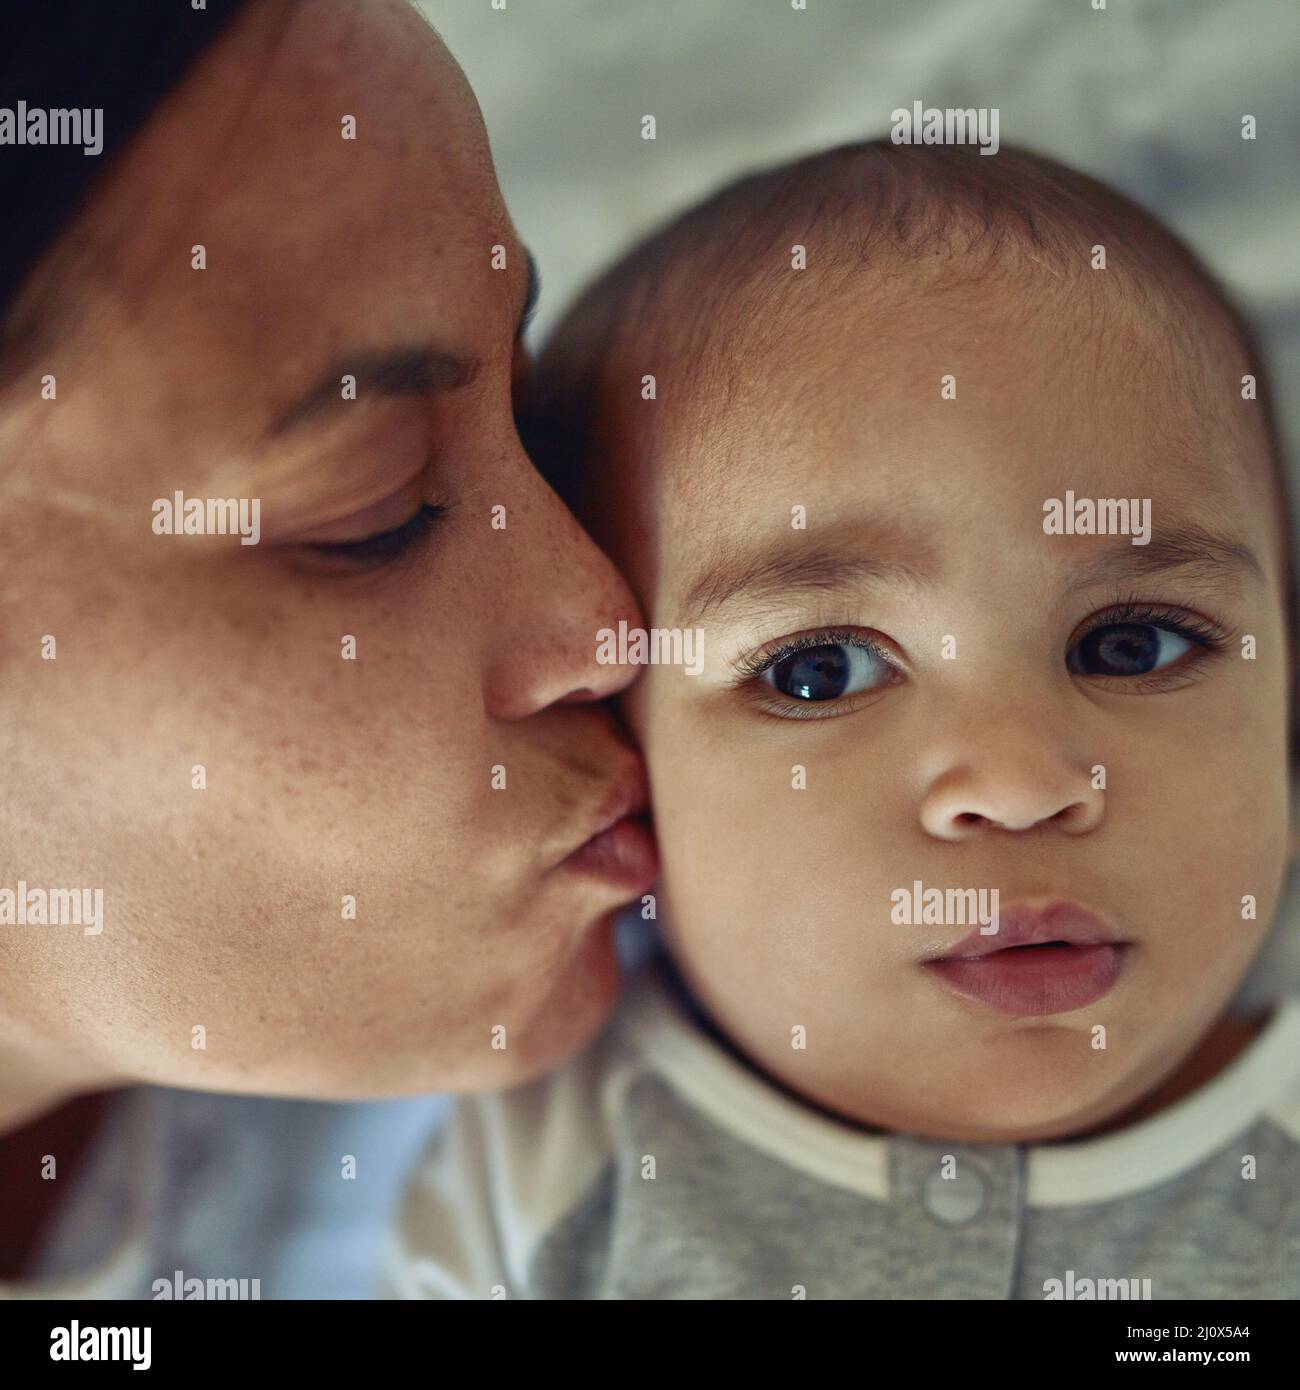 Mothers love their kids instinctively. Shot of a mother kissing her adorable baby boy on the cheek at home. Stock Photo